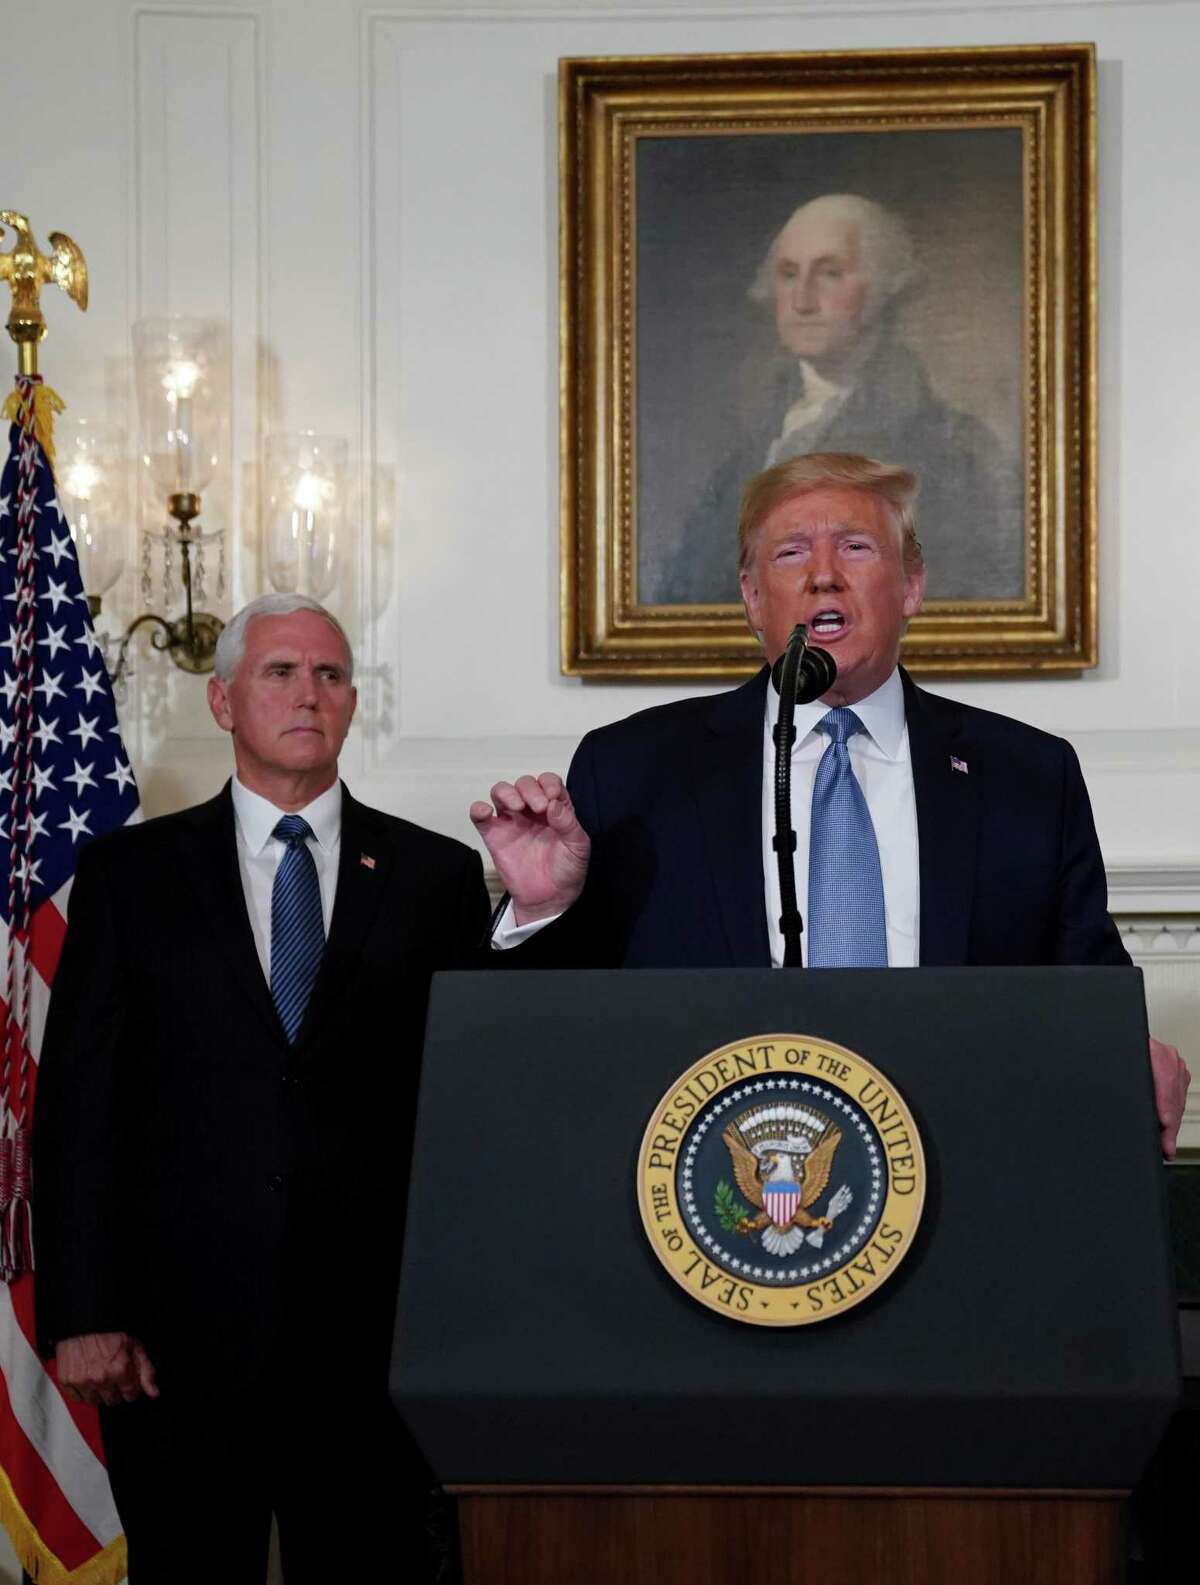 If Senate Republicans did move forward with impeachment of President Donald Trump, Vice President Mike Pence would ascend to the presidency. He reflects the Republican worldview.